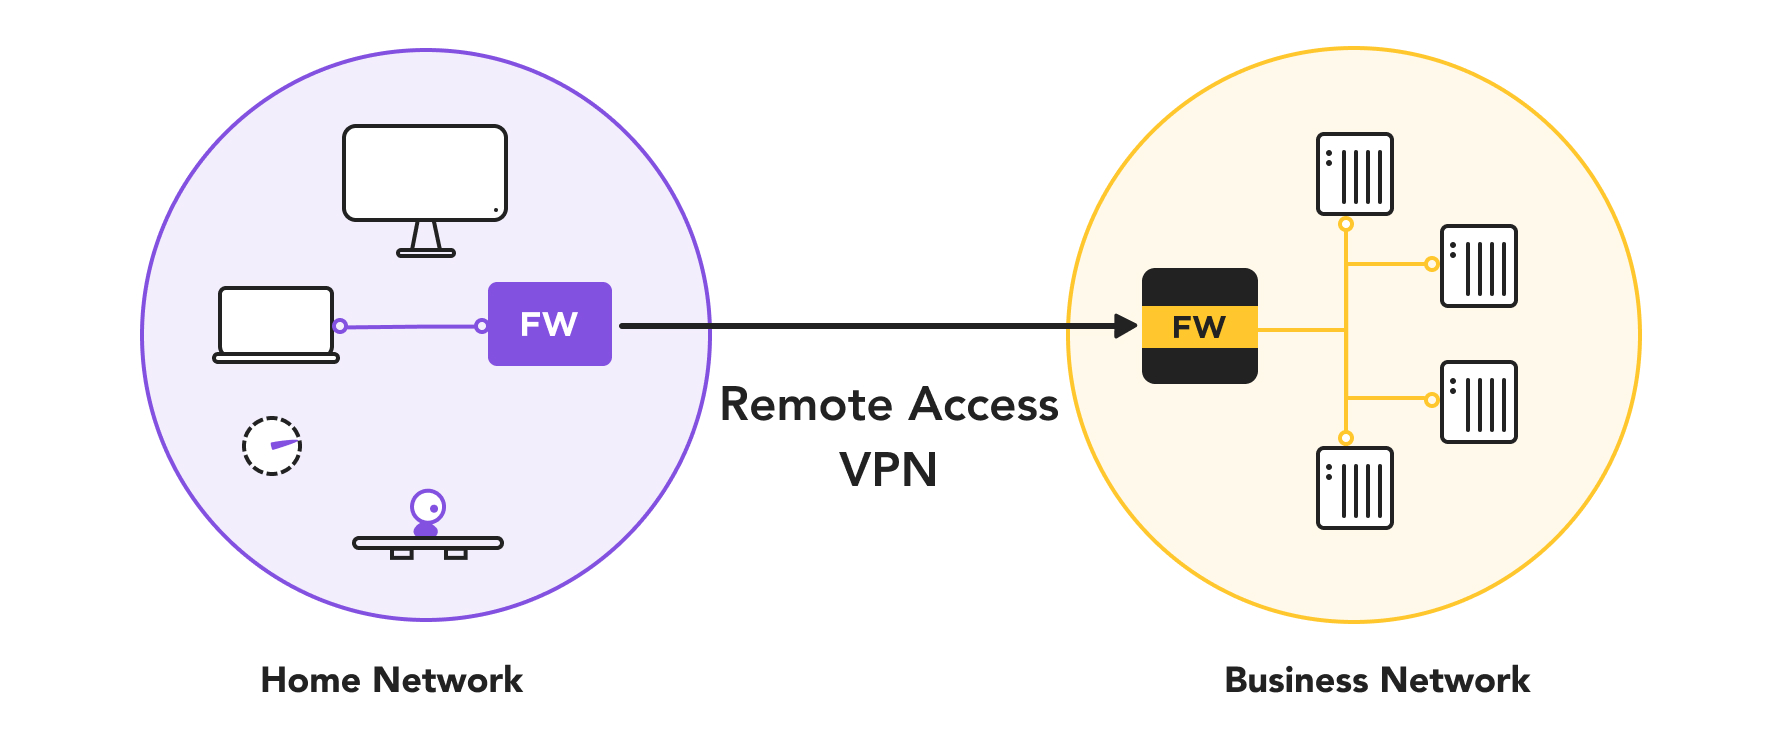 Firewalla Purple connected through Remote Access VPN to Firewalla Gold's Business Network